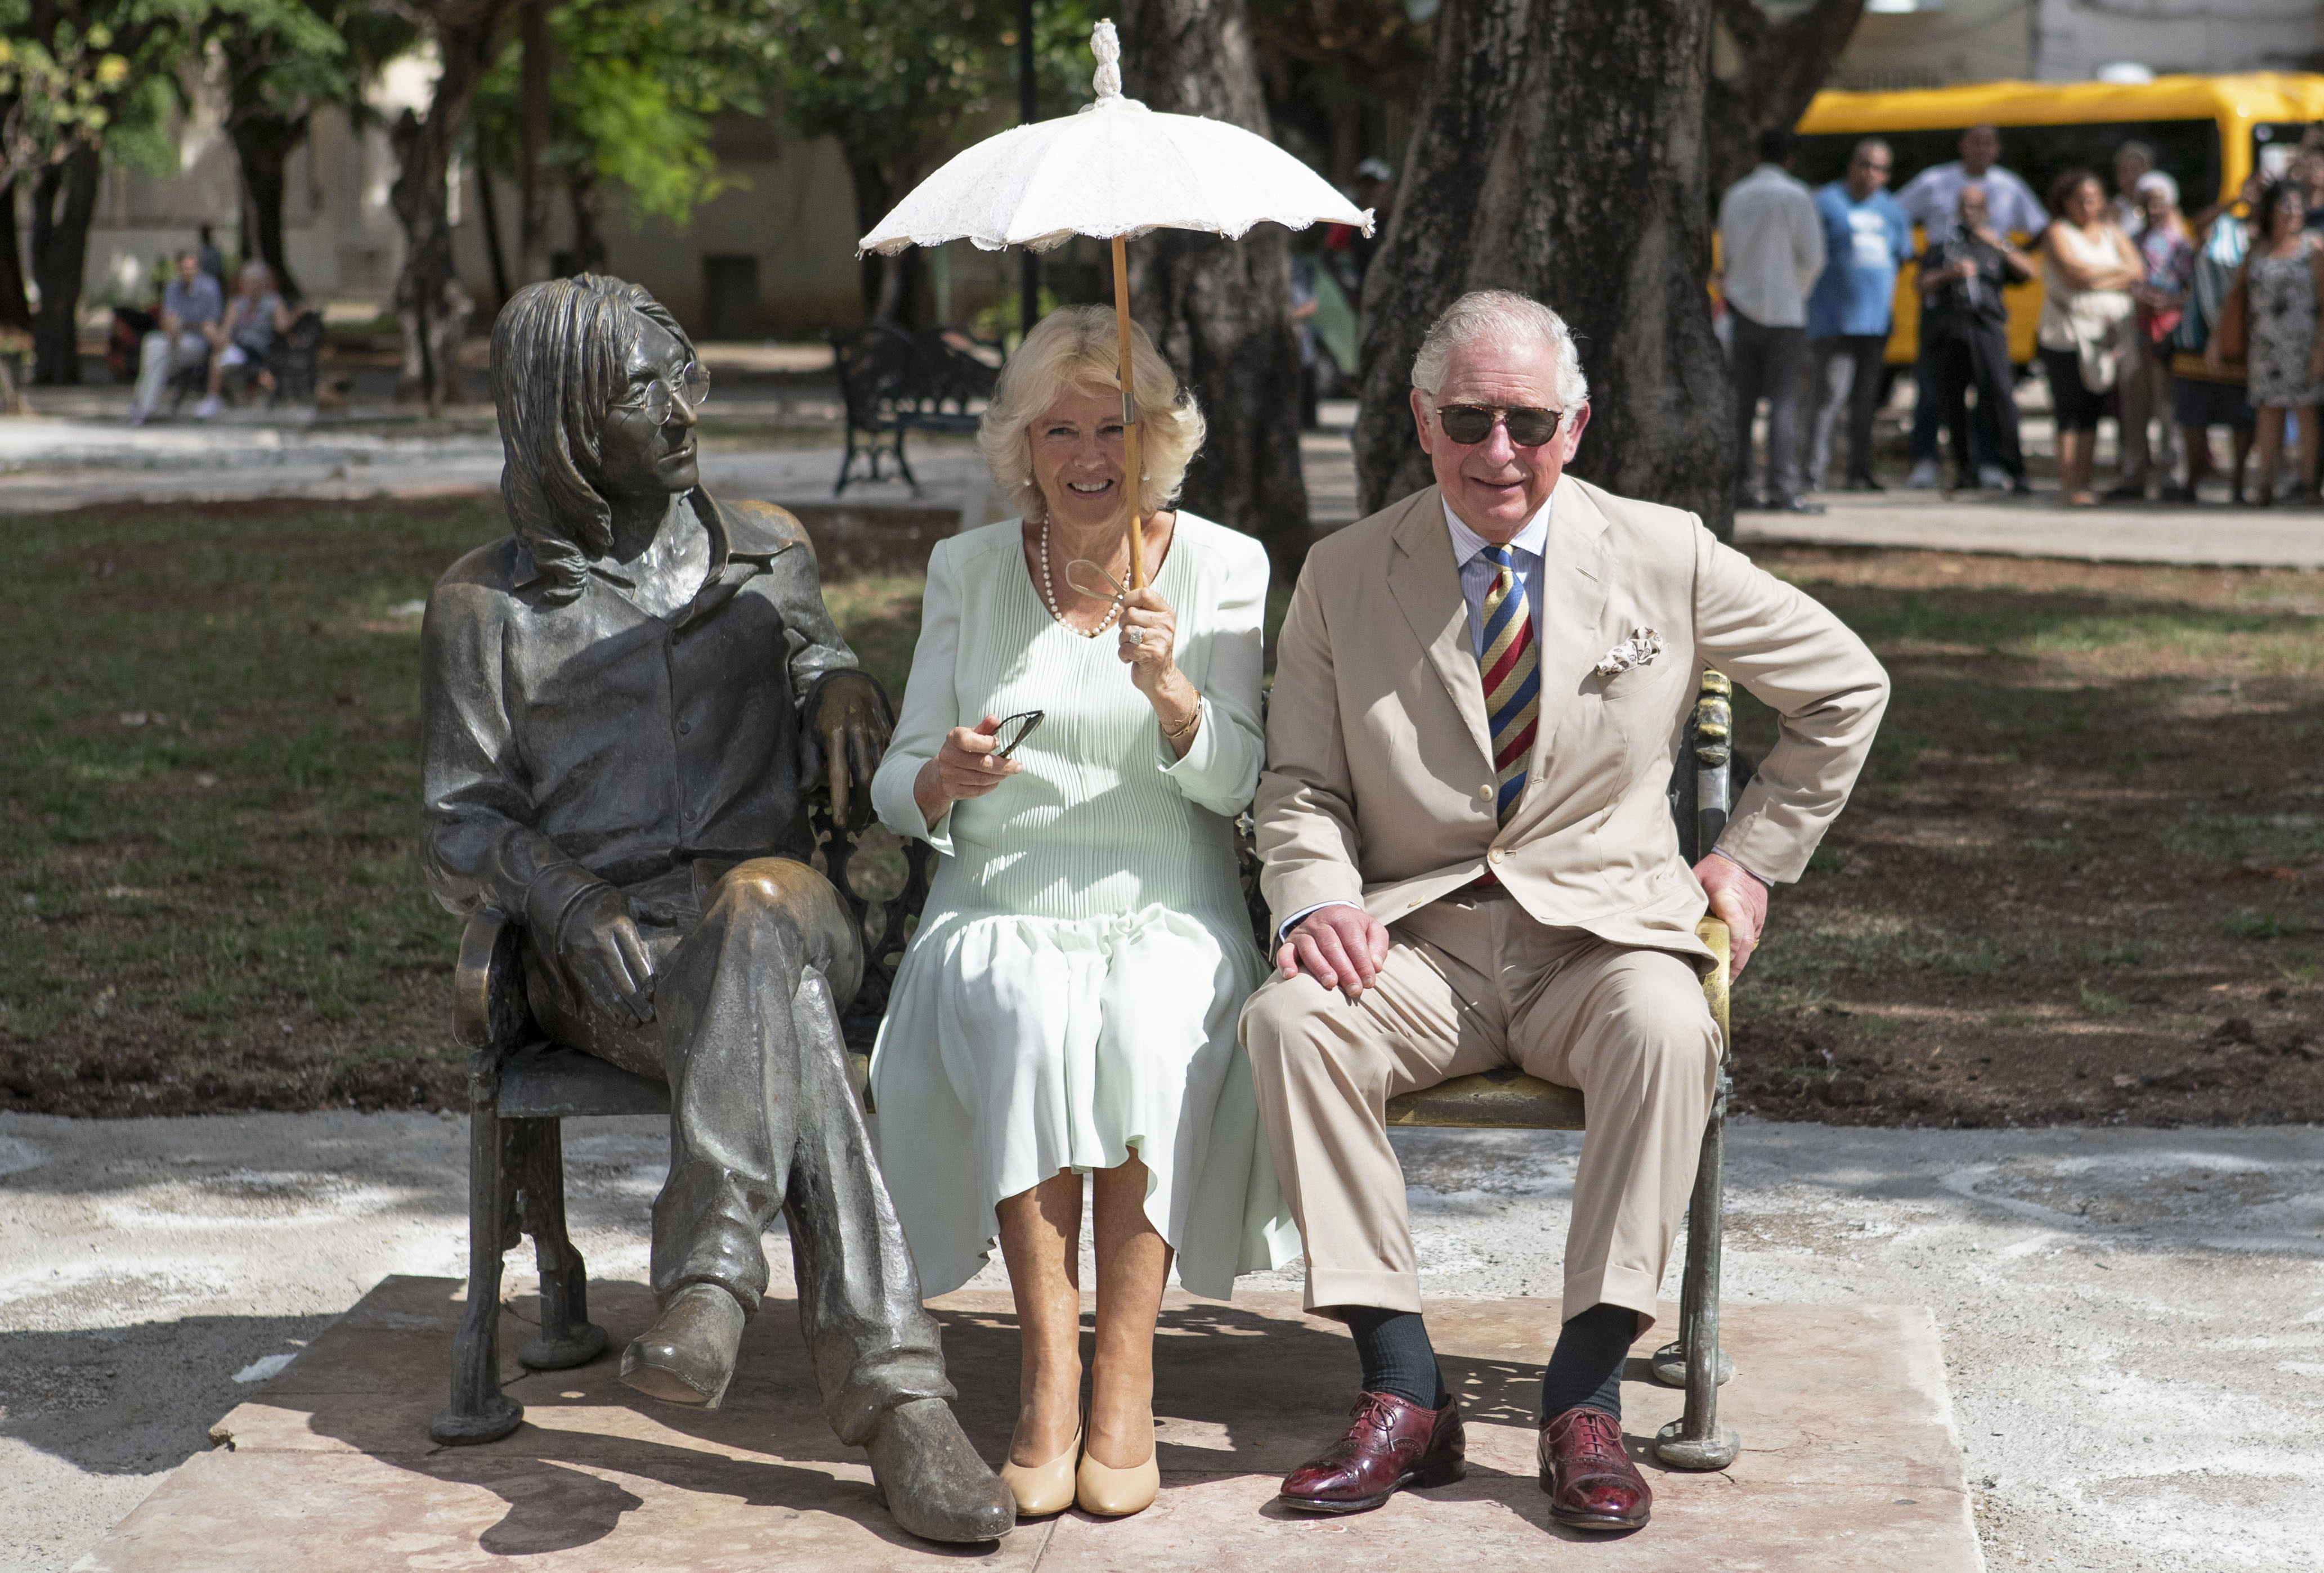 Charles and the then-Duchess of Cornwall sitting on the John Lennon memorial bench in Havana, Cuba